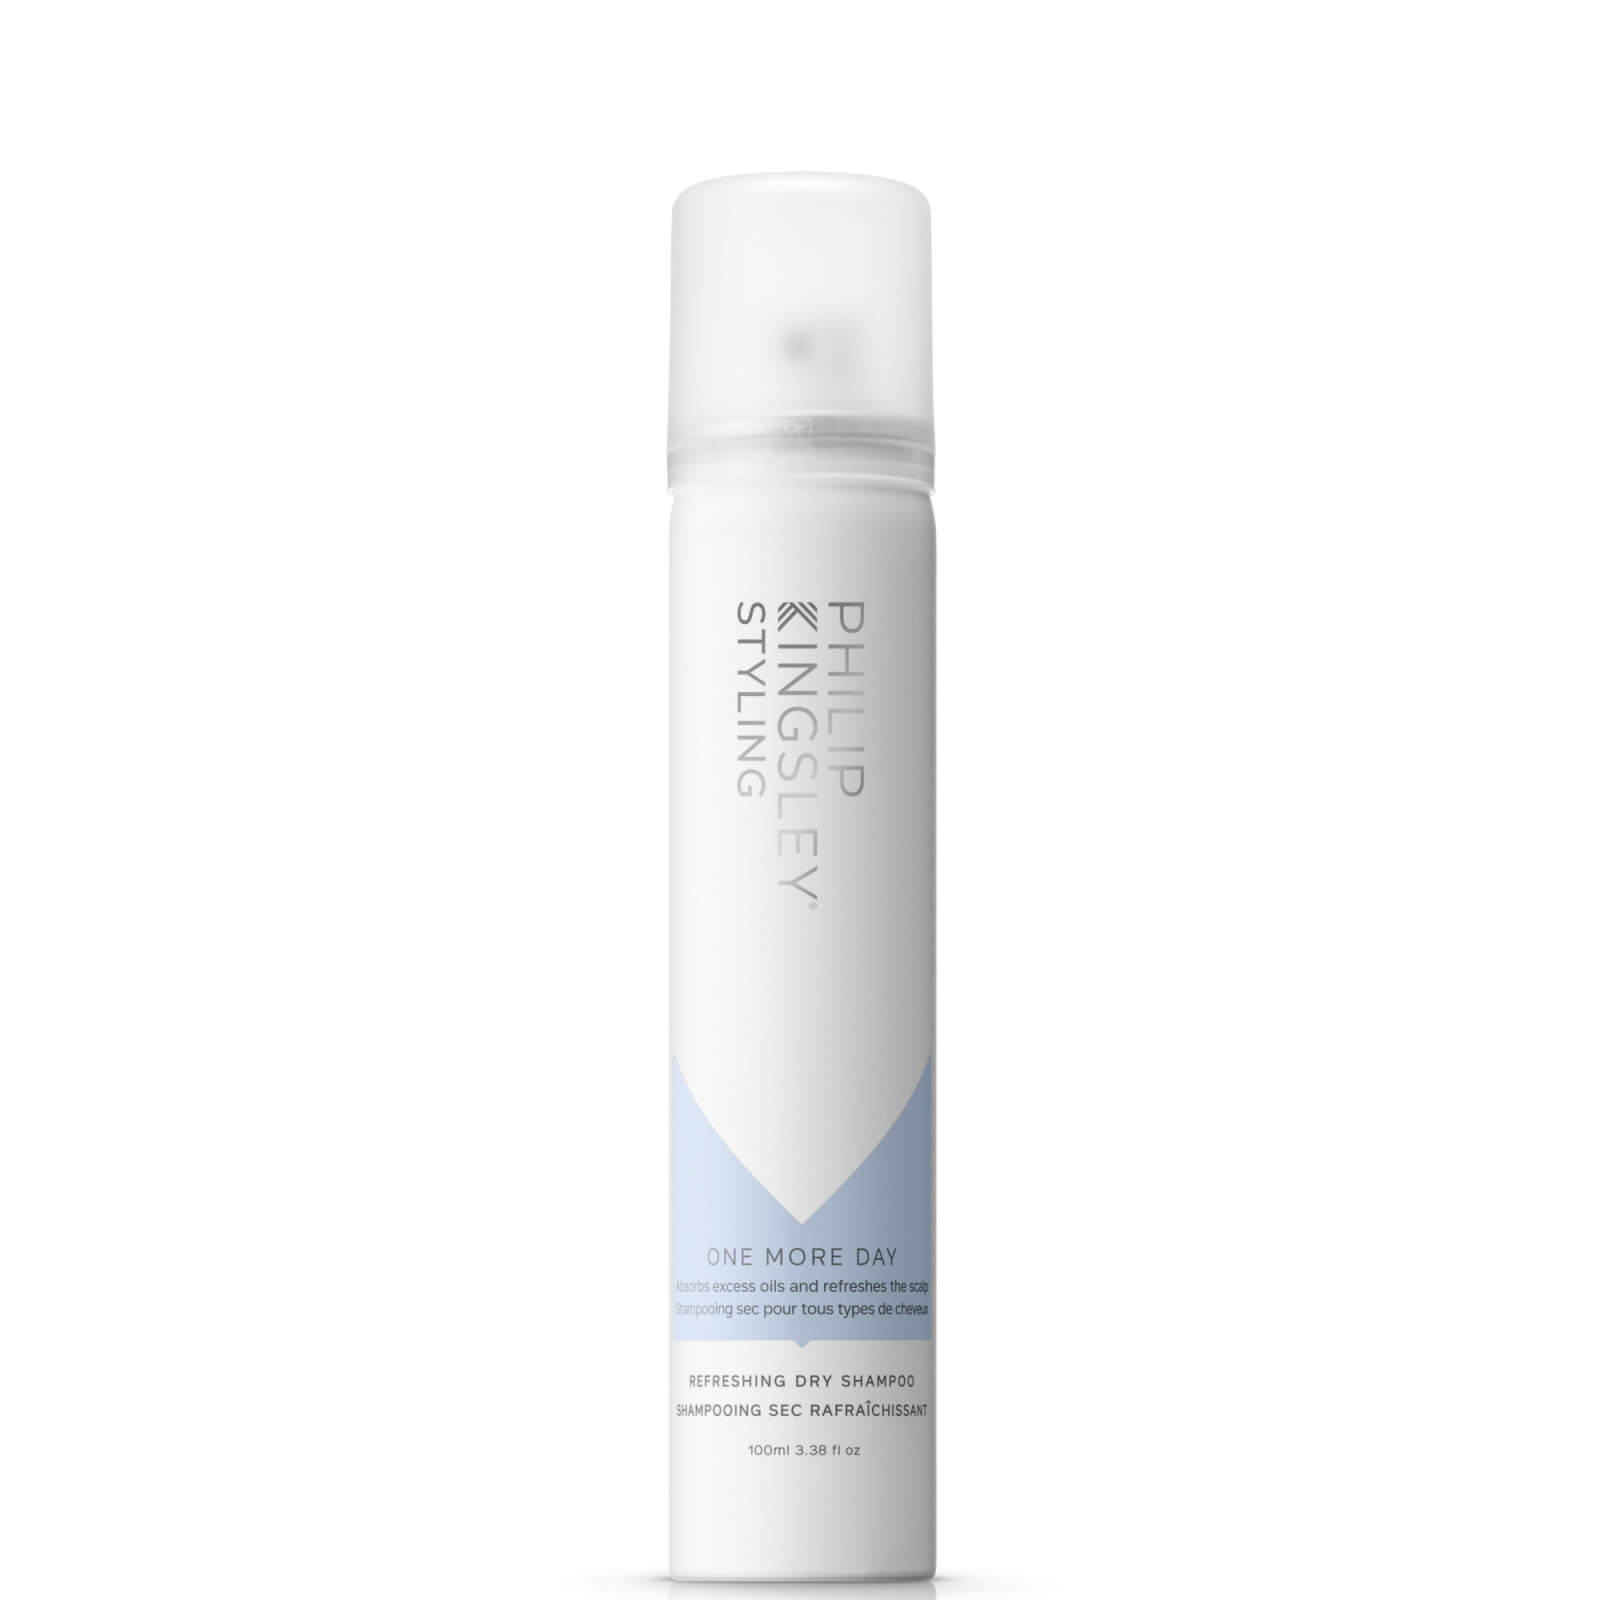 Image of Philip Kingsley One More Day Refreshing Dry Shampoo 100ml